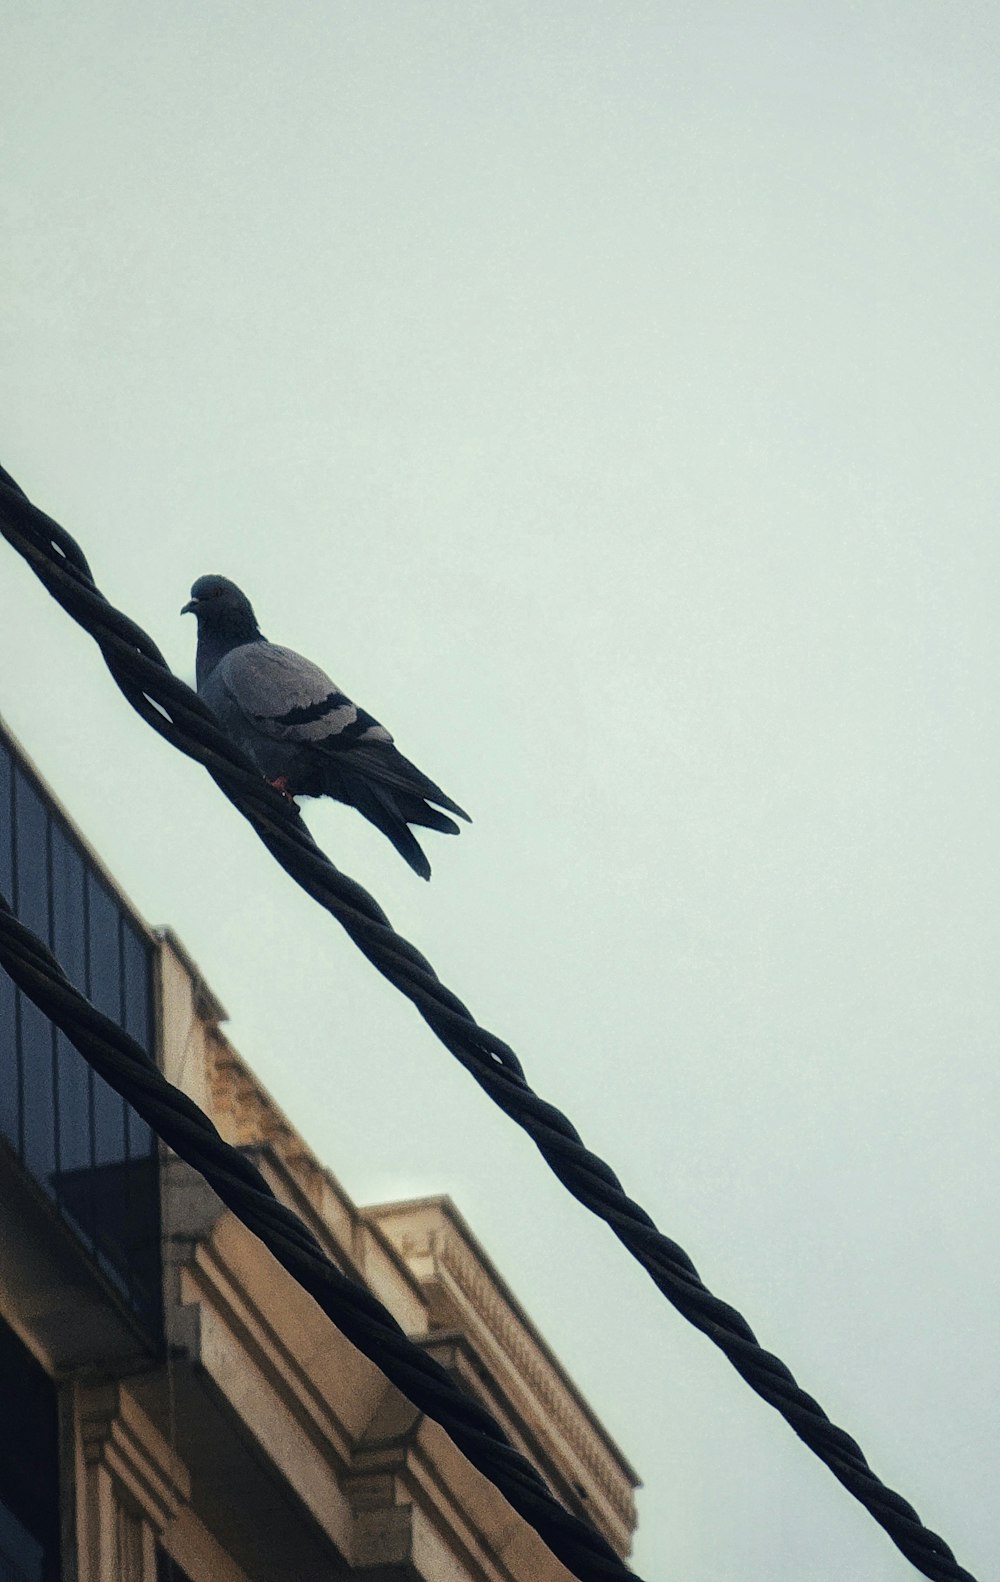 a pigeon sitting on a power line next to a building